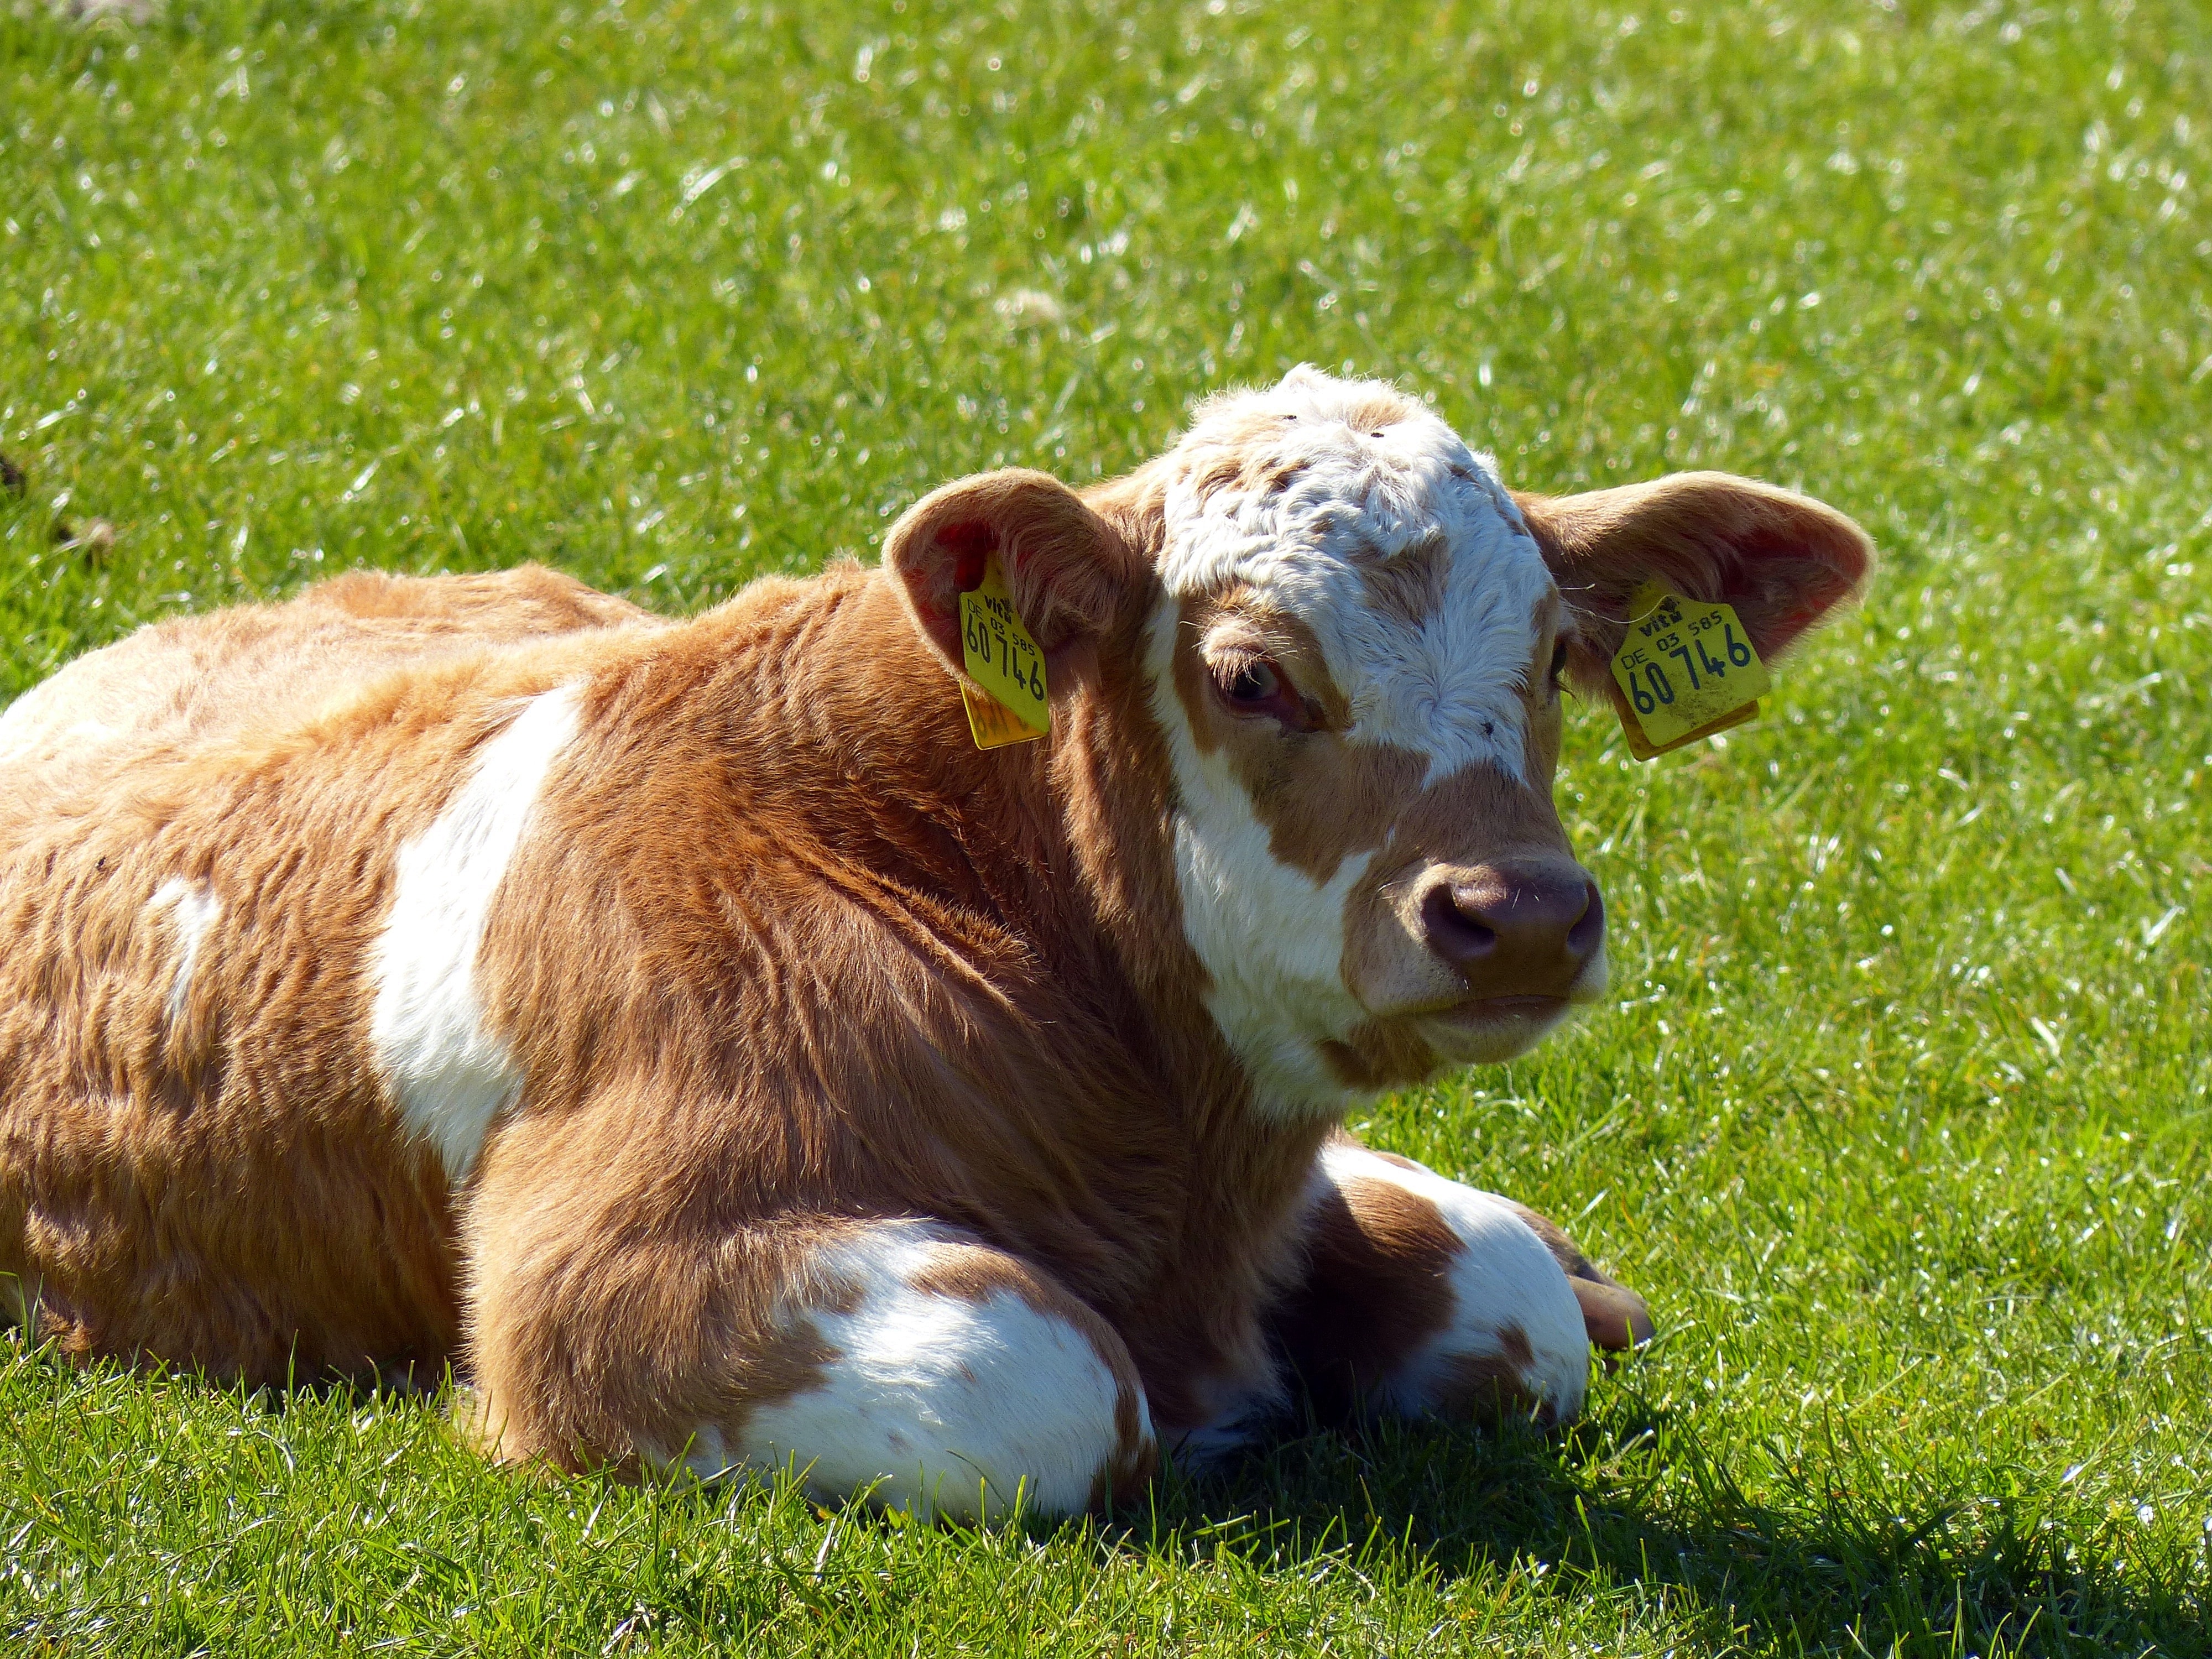 Animal, Beef, Agriculture, Meadow, Calf, grass, one animal